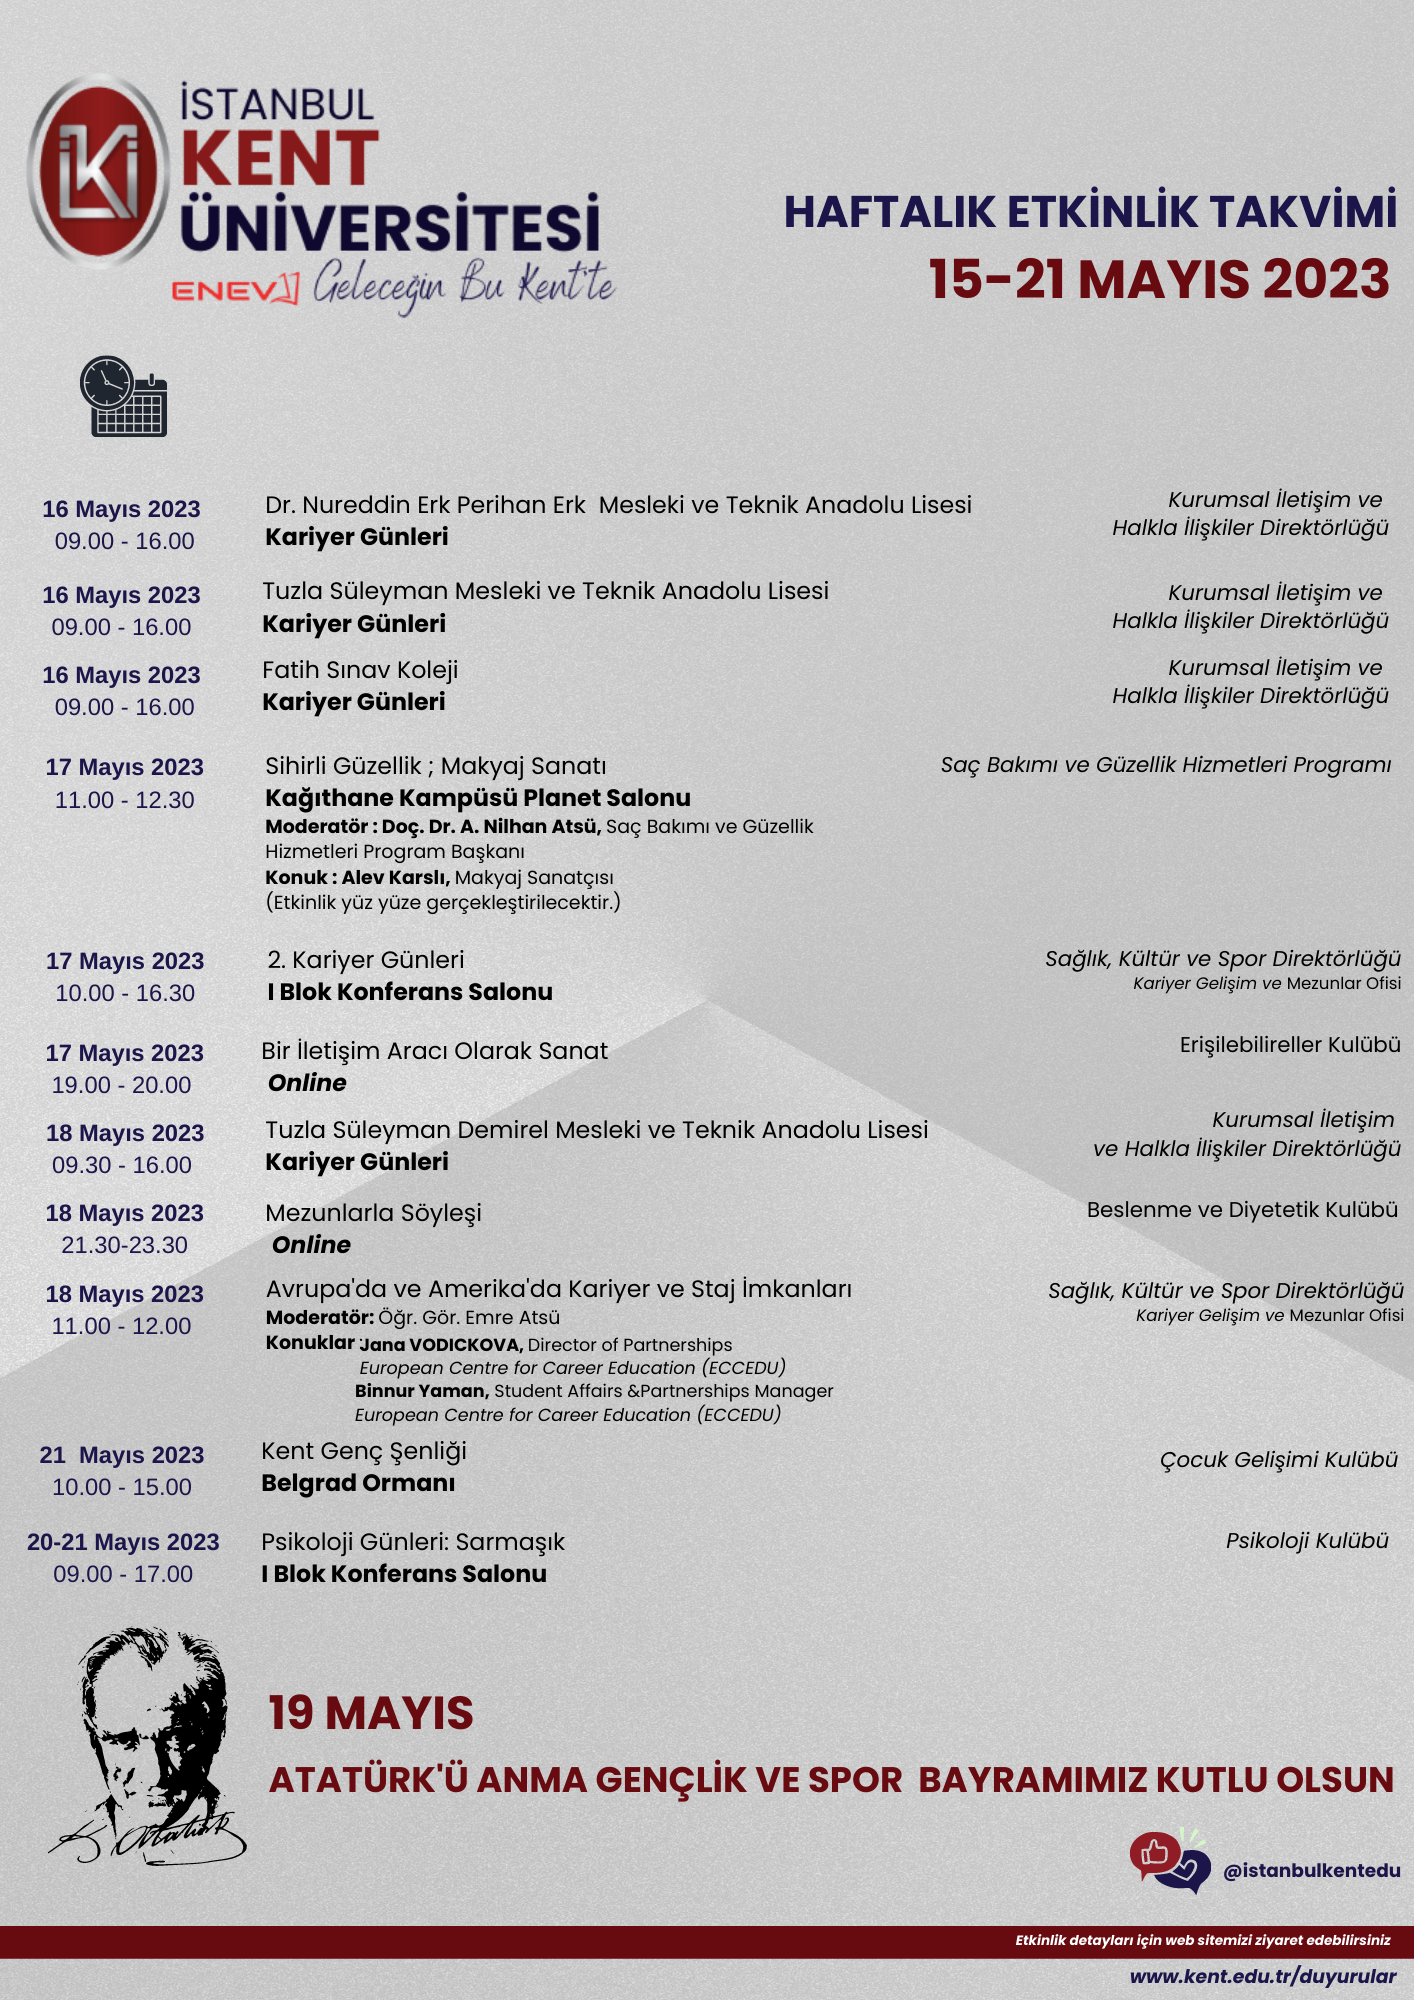 15-21 May 2023 Istanbul KENT University Weekly Events